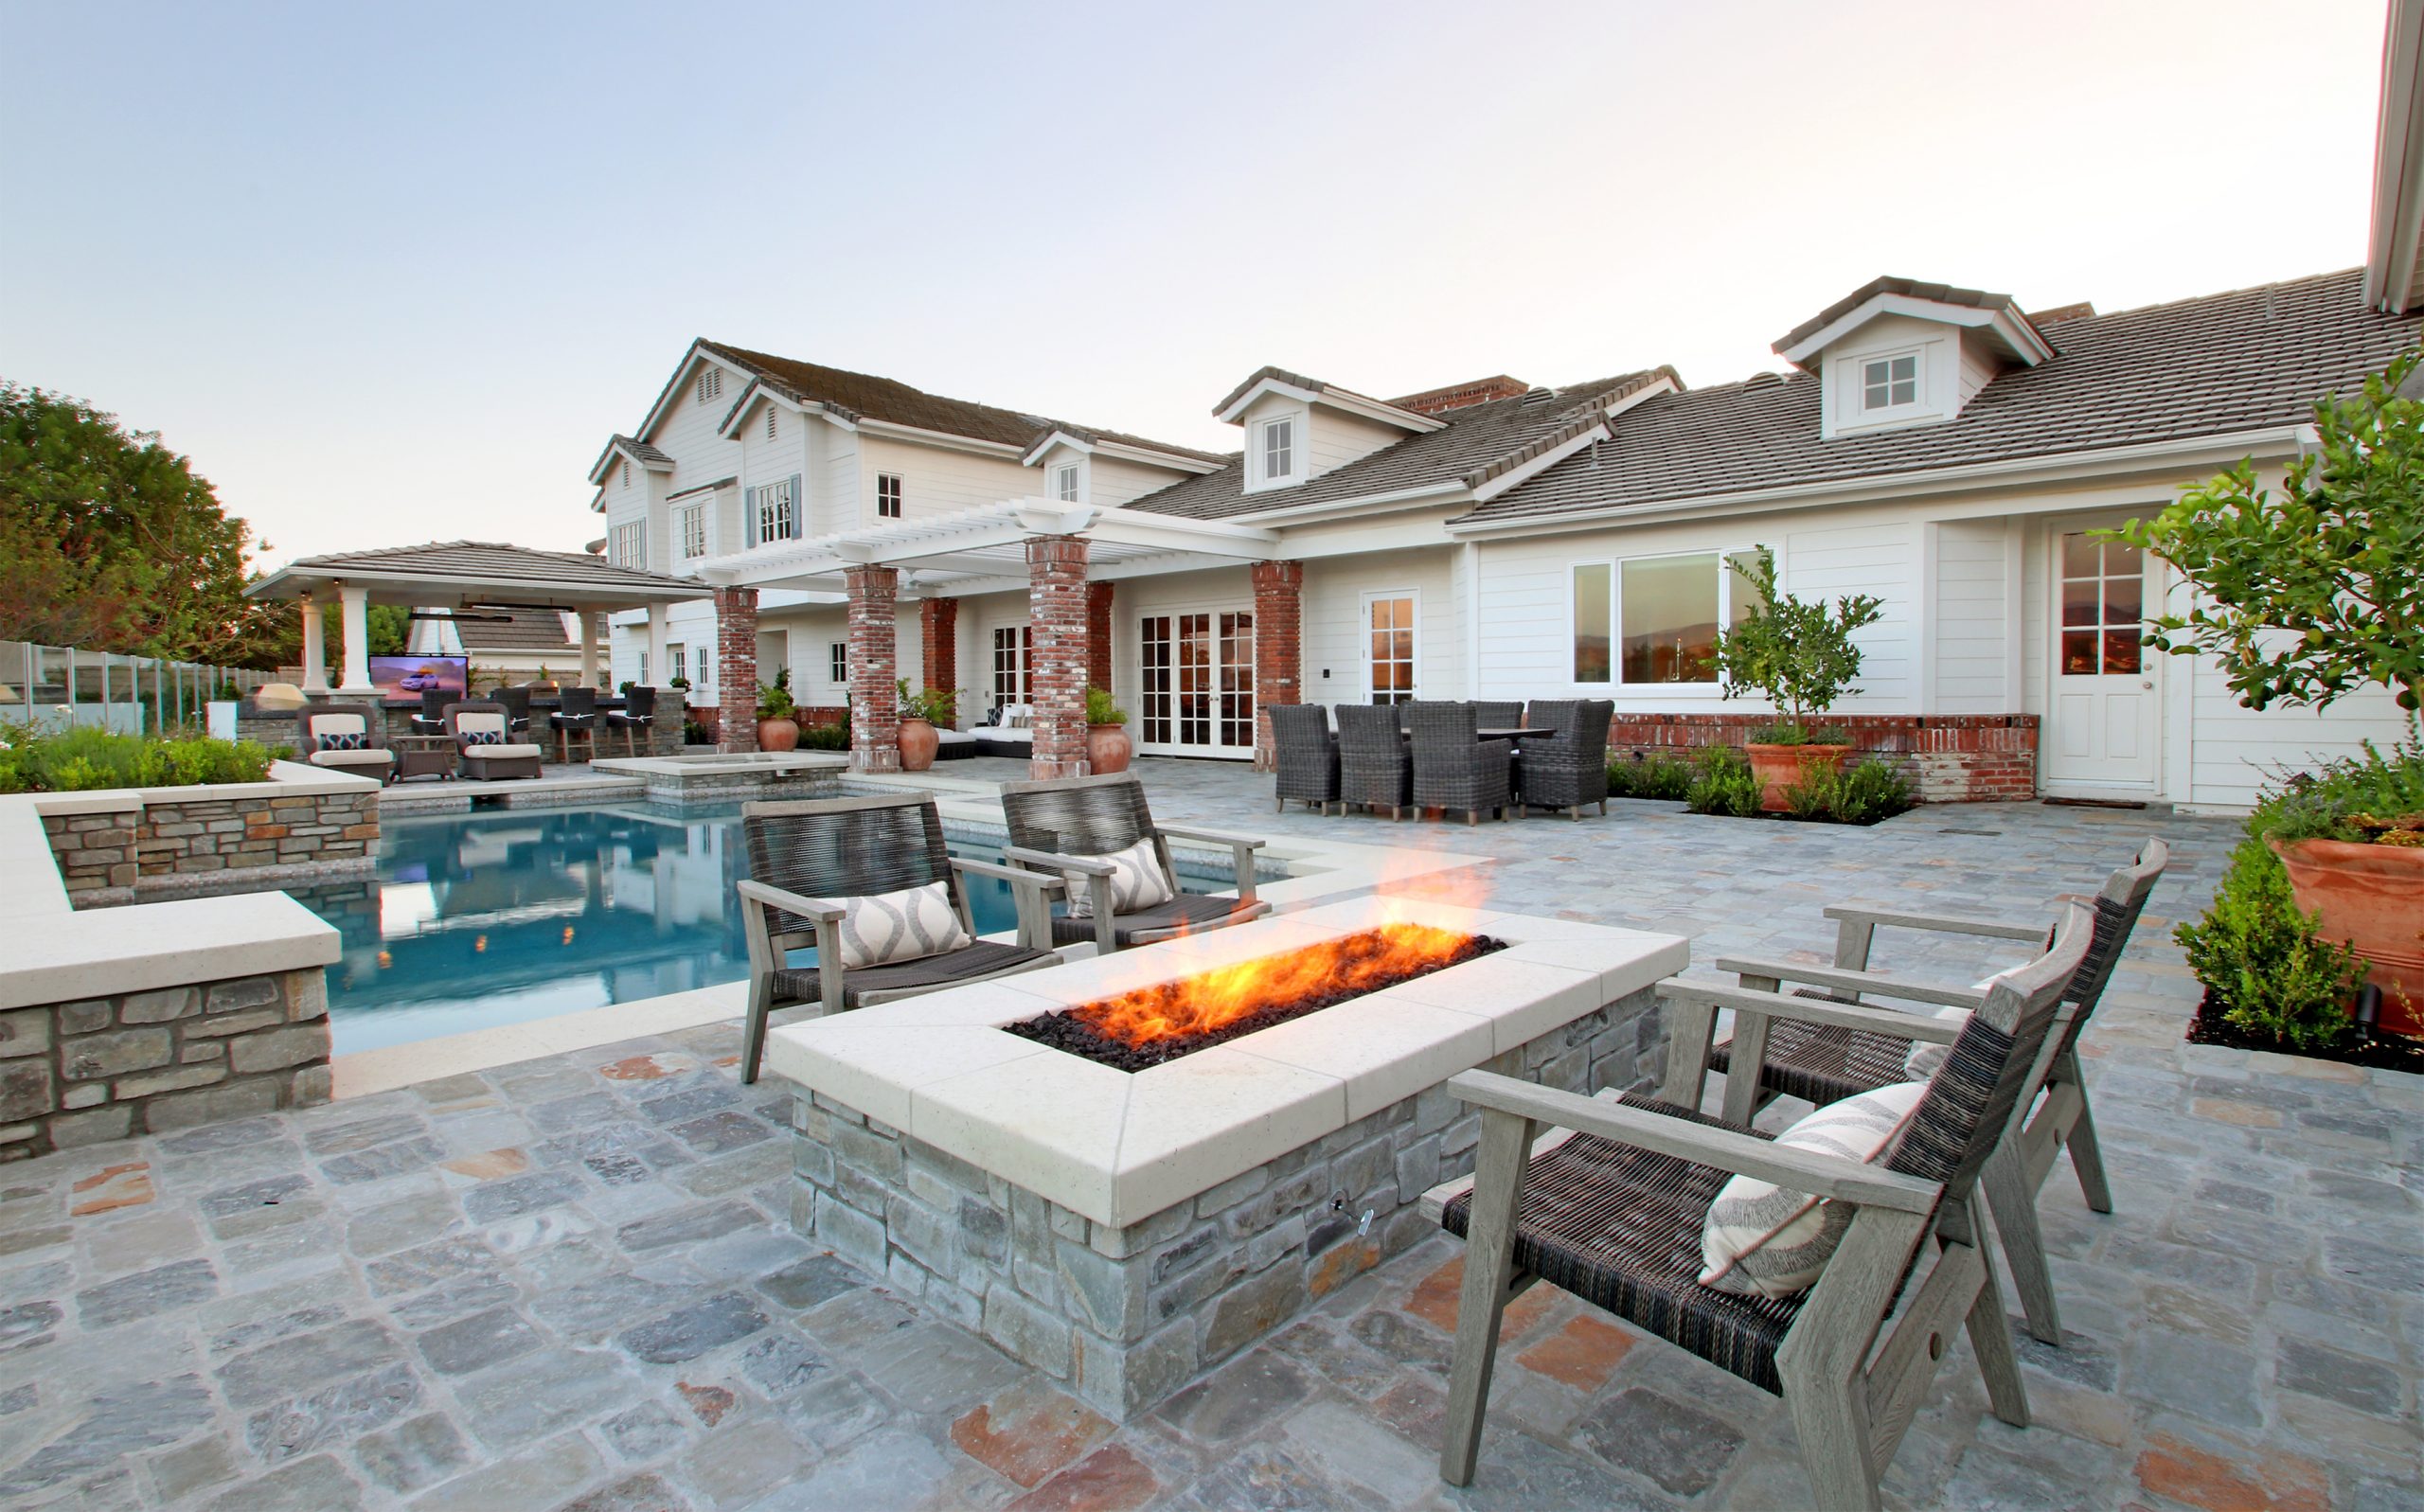 Large outdoor firepit and stone decking, Dreamscape by MGR leading pool contractor in Orange County